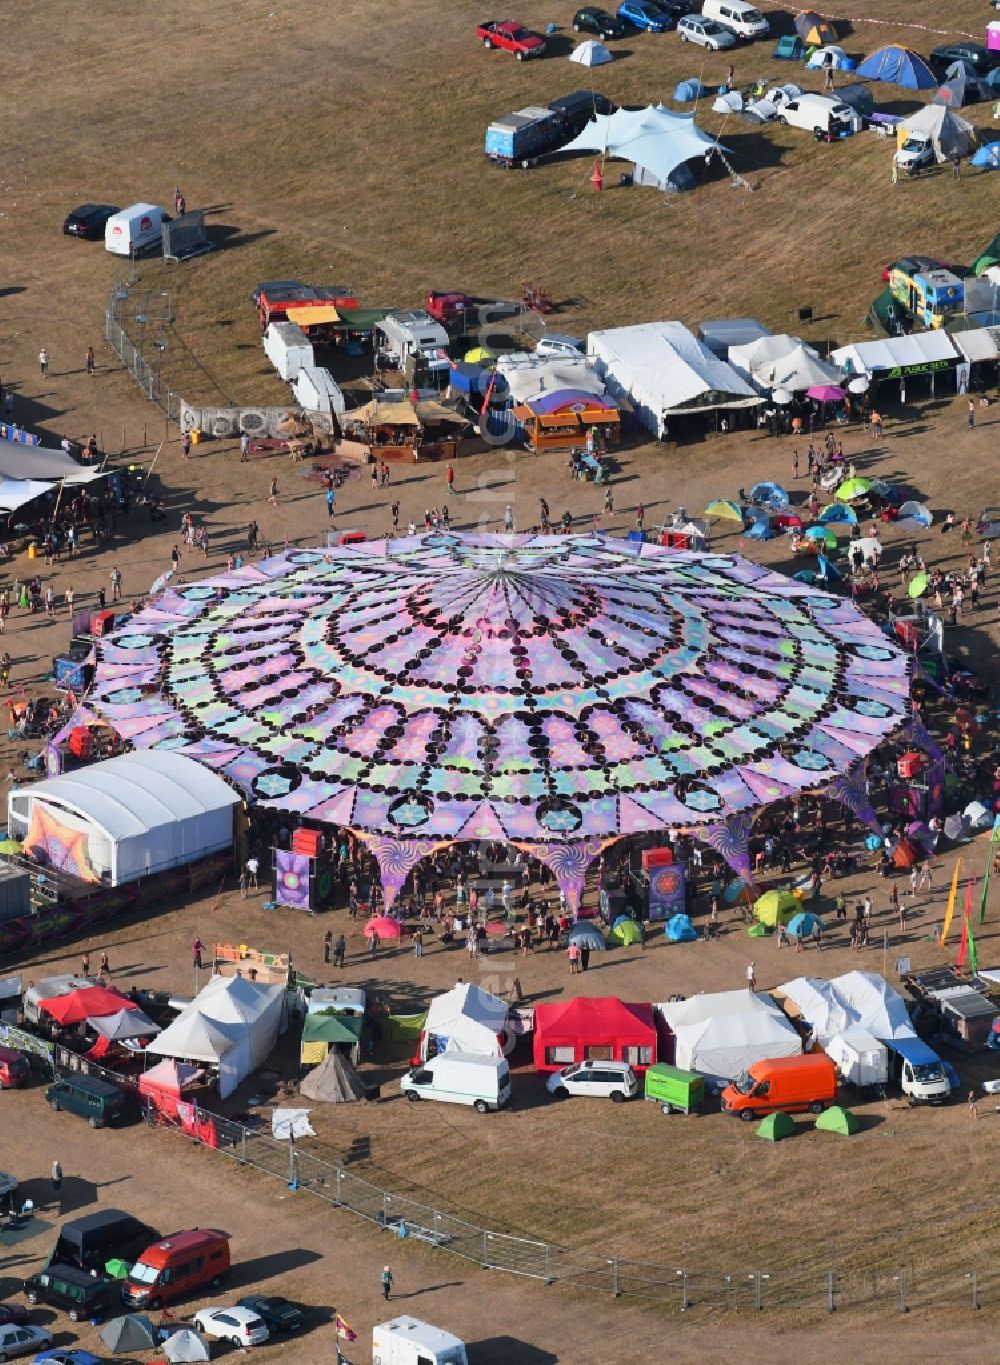 Stölln from the bird's eye view: Participants in the Antaris Projekt music festival on the event concert area on airfield in Stoelln in the state Brandenburg, Germany